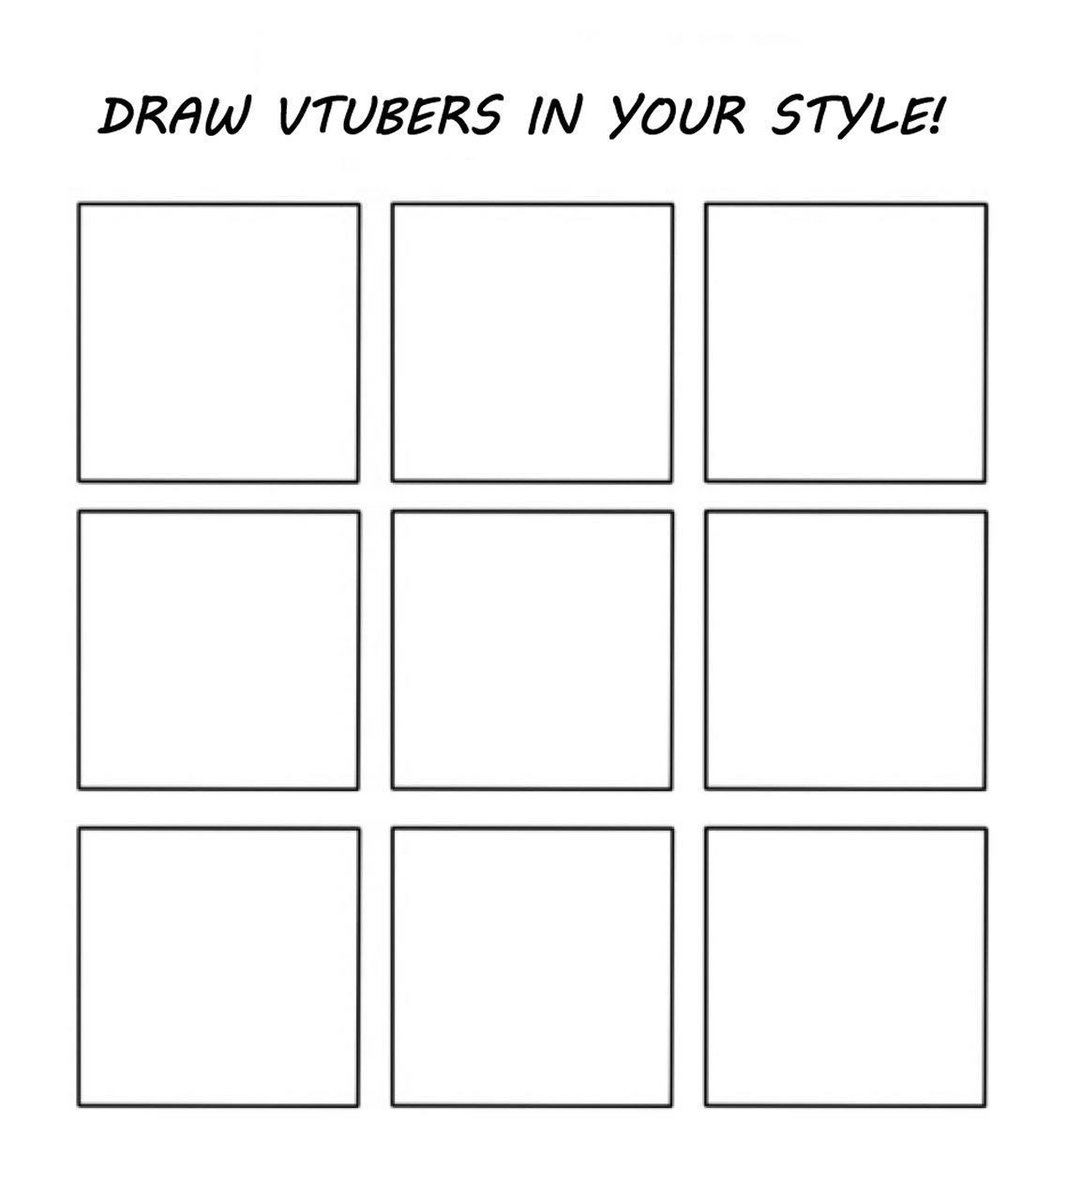 I'll do this when I take breaks from comms 😳💦 Which vtubers would you like to see in my style? 